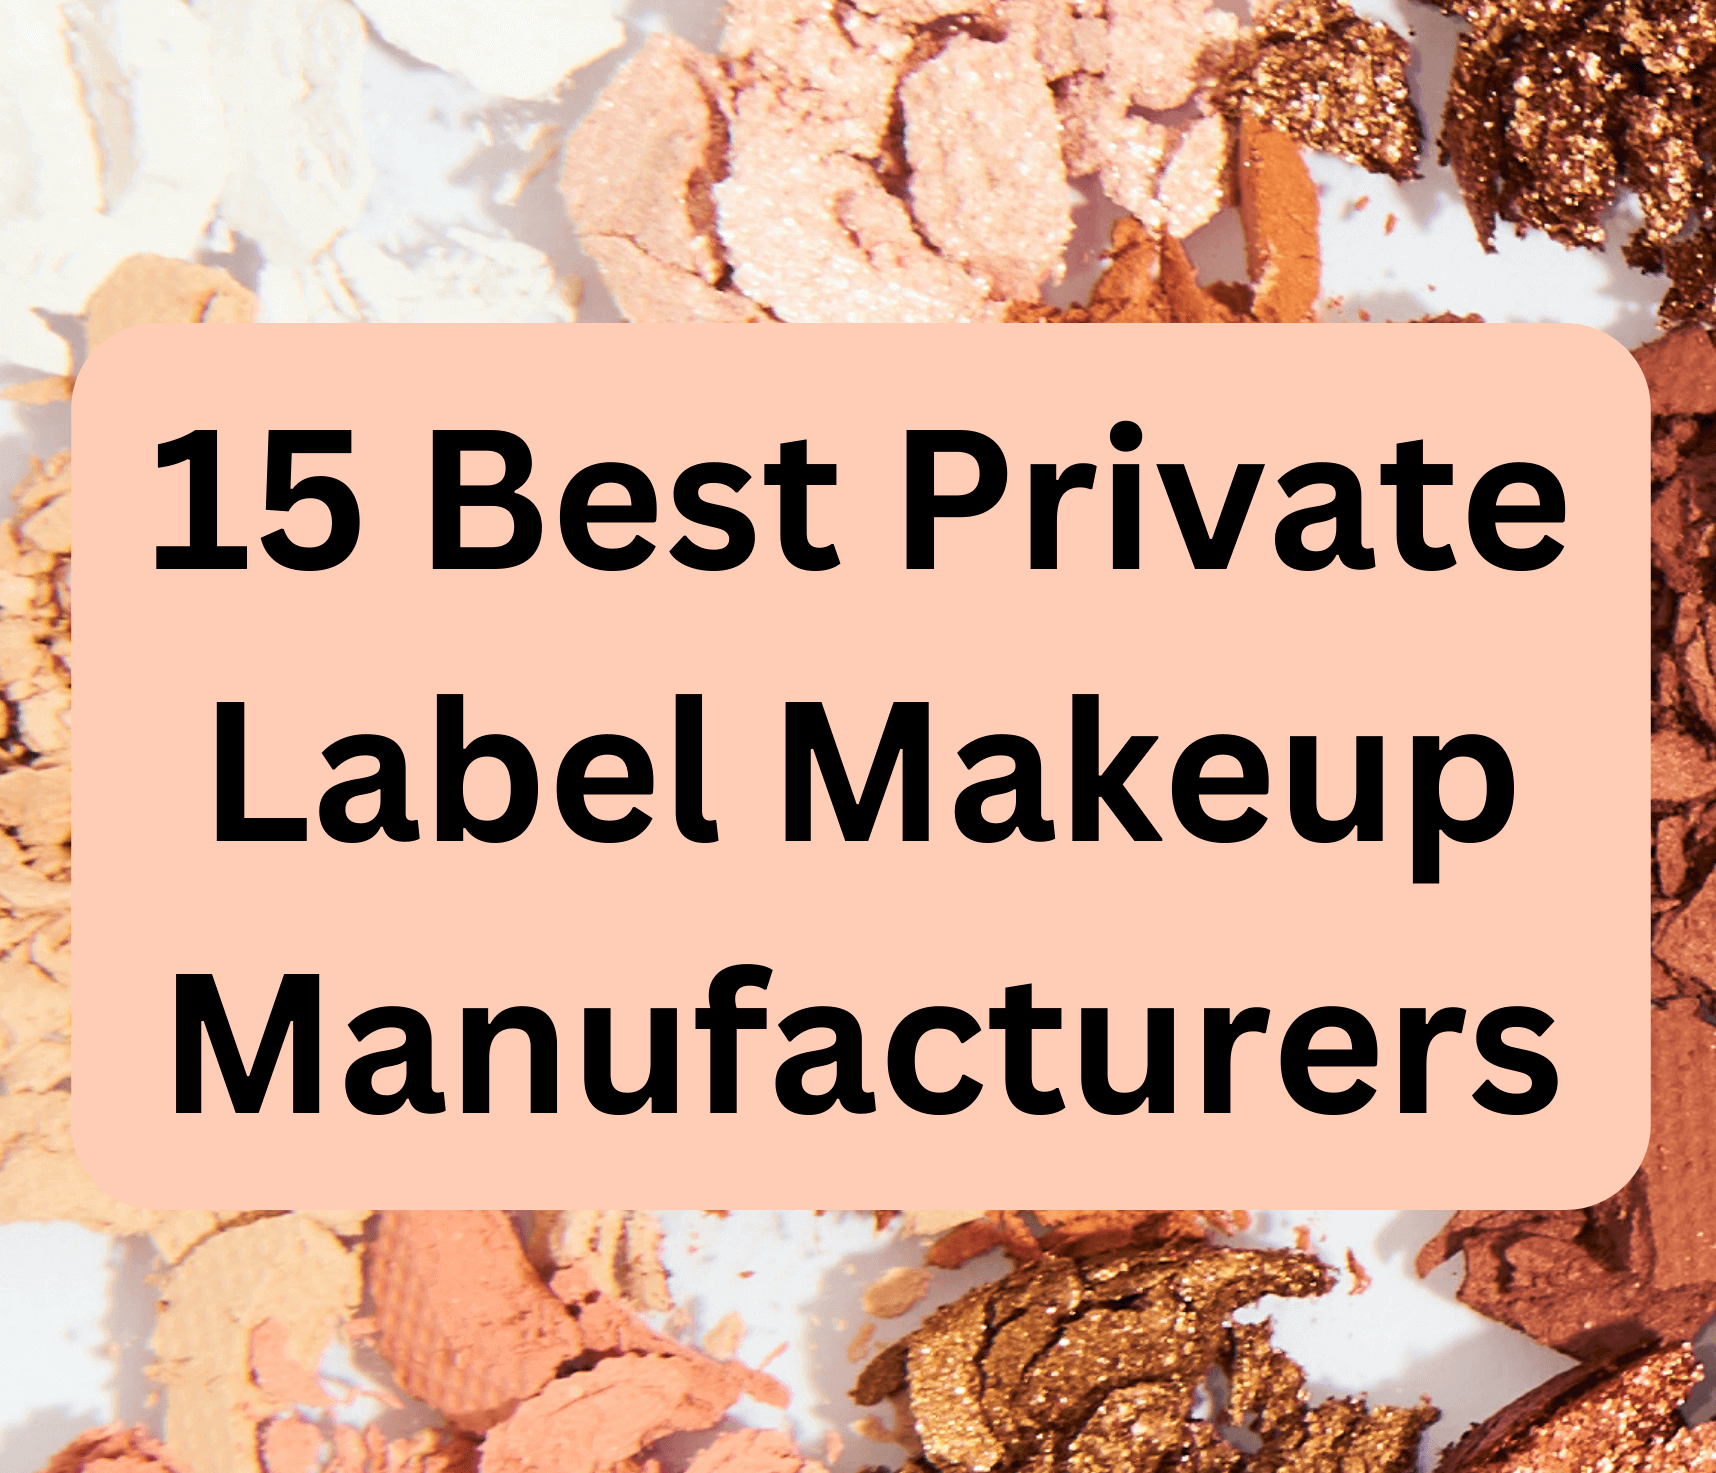 15 Best Private Label Makeup Manufacturers for Your Beauty Brand